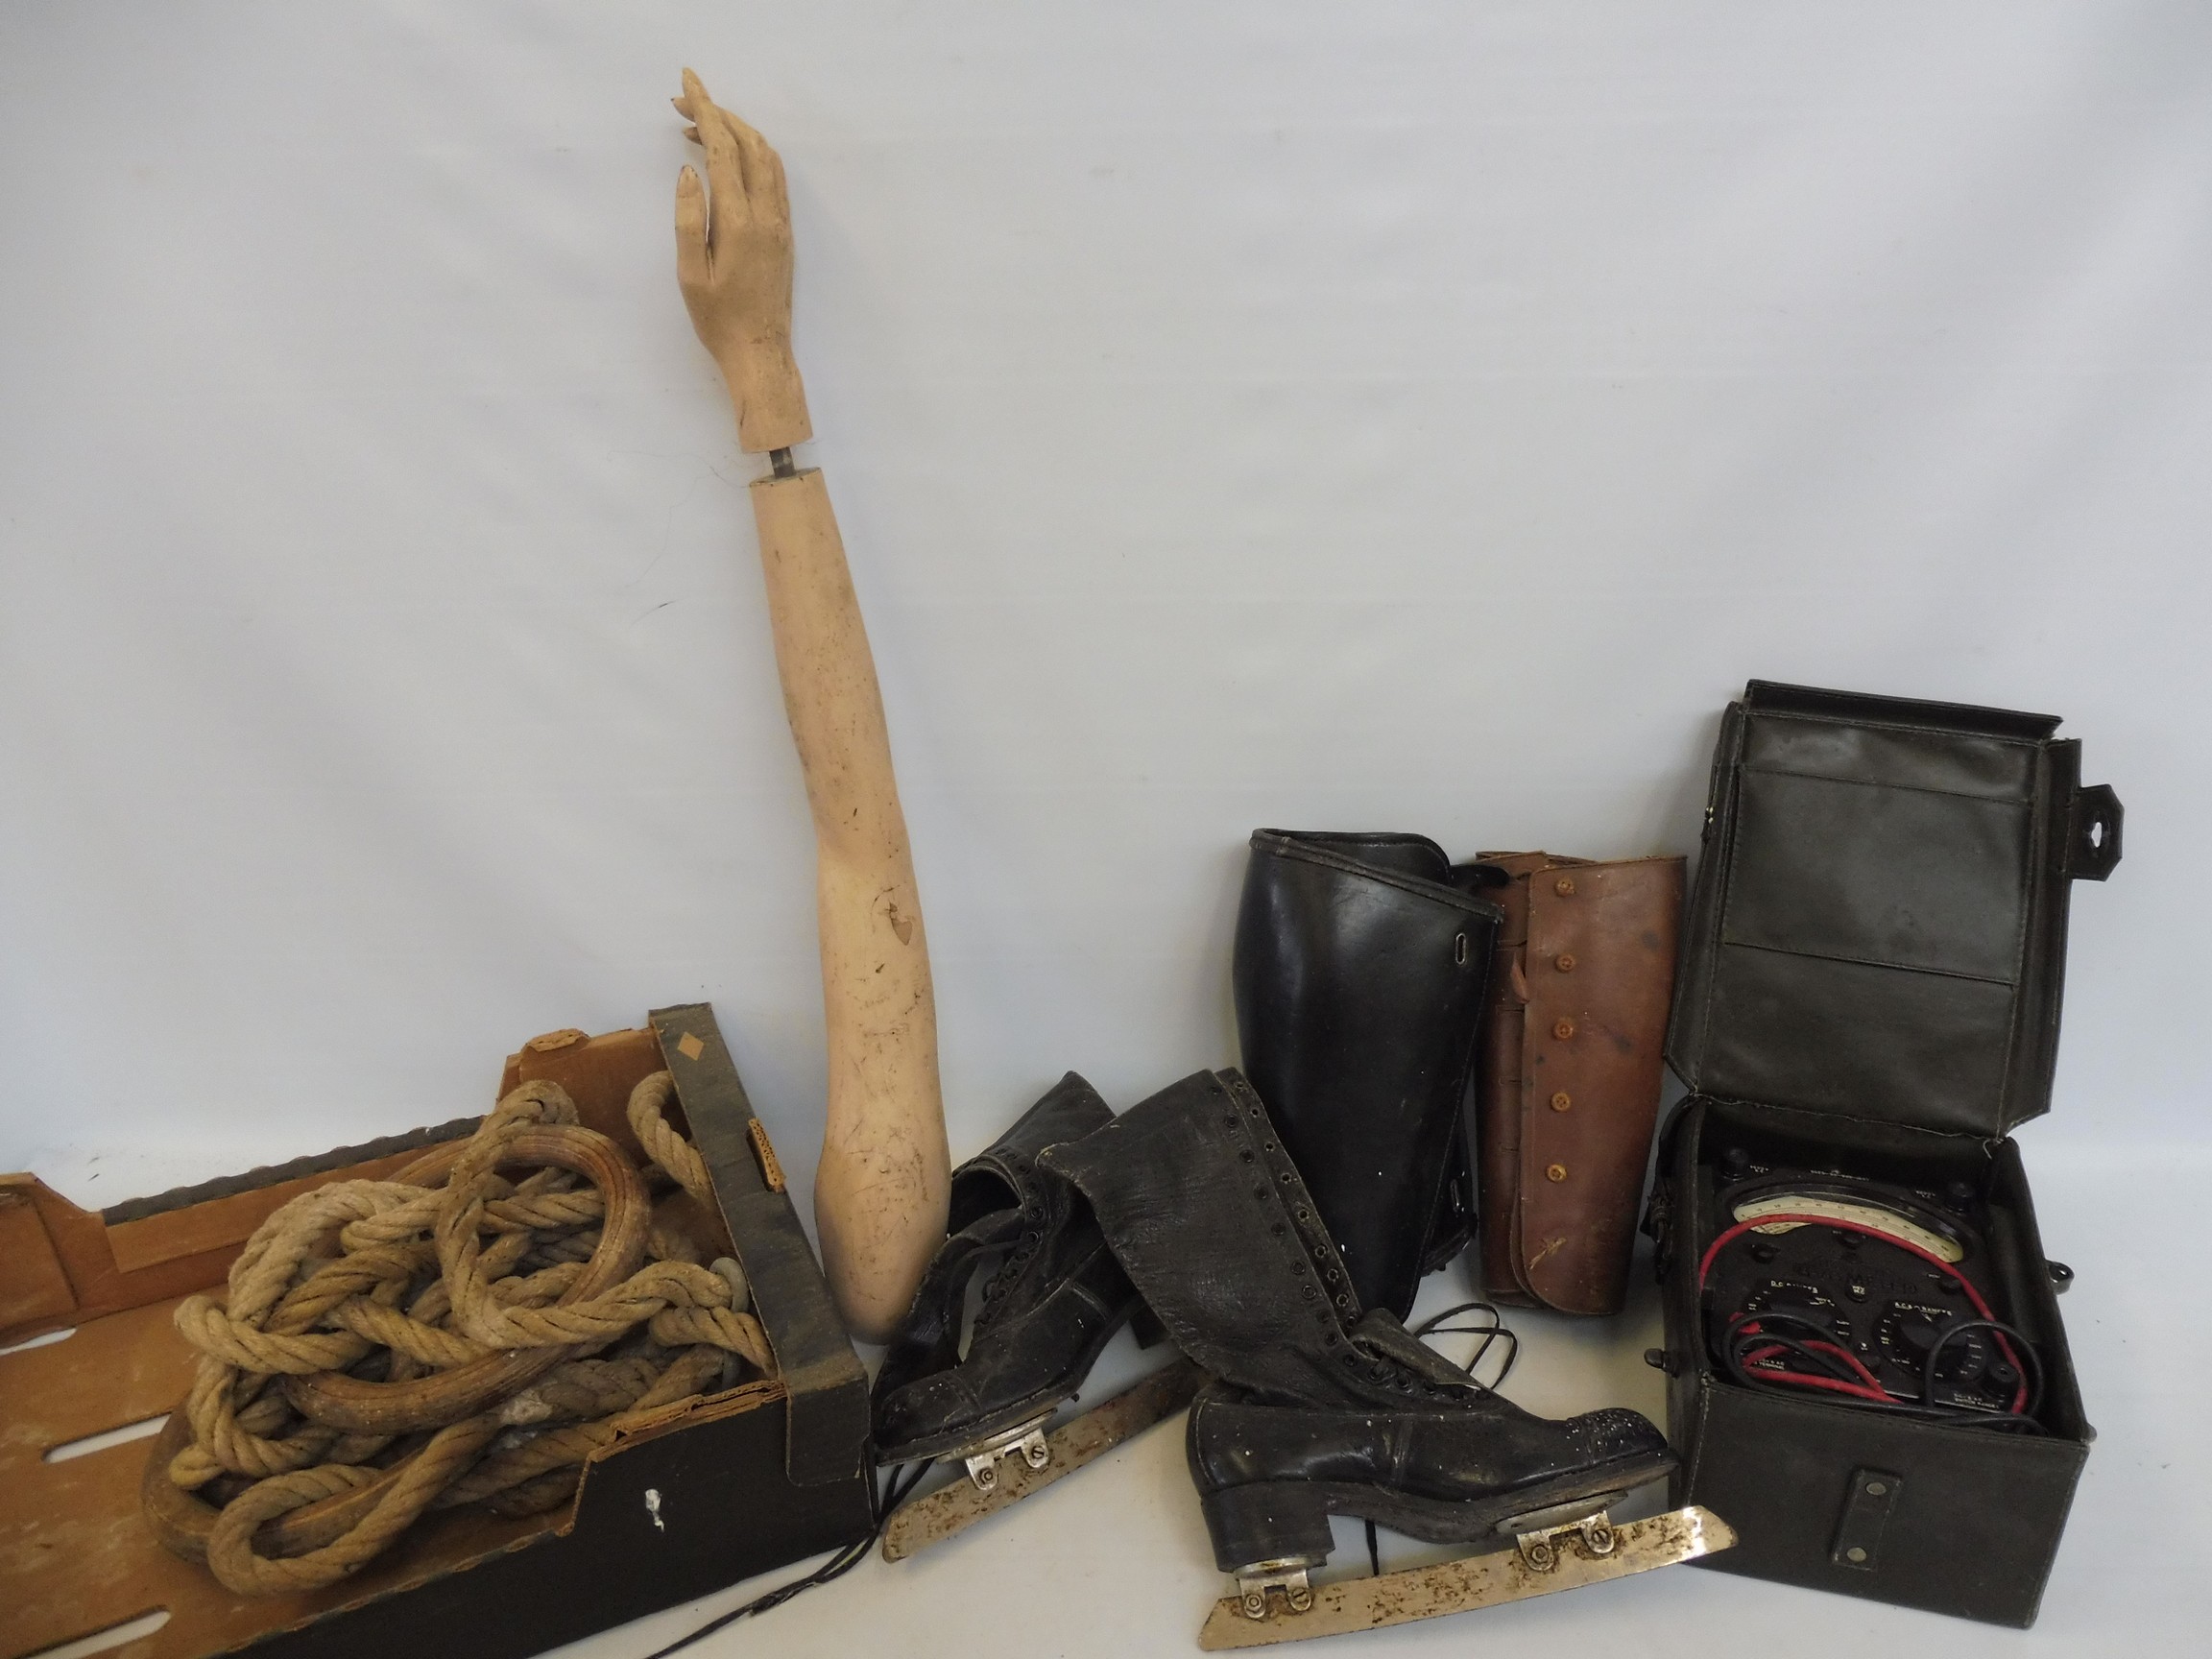 A pair of gymnastics rings, a pair of leather lady's skates, various leather gaiters and an AVO